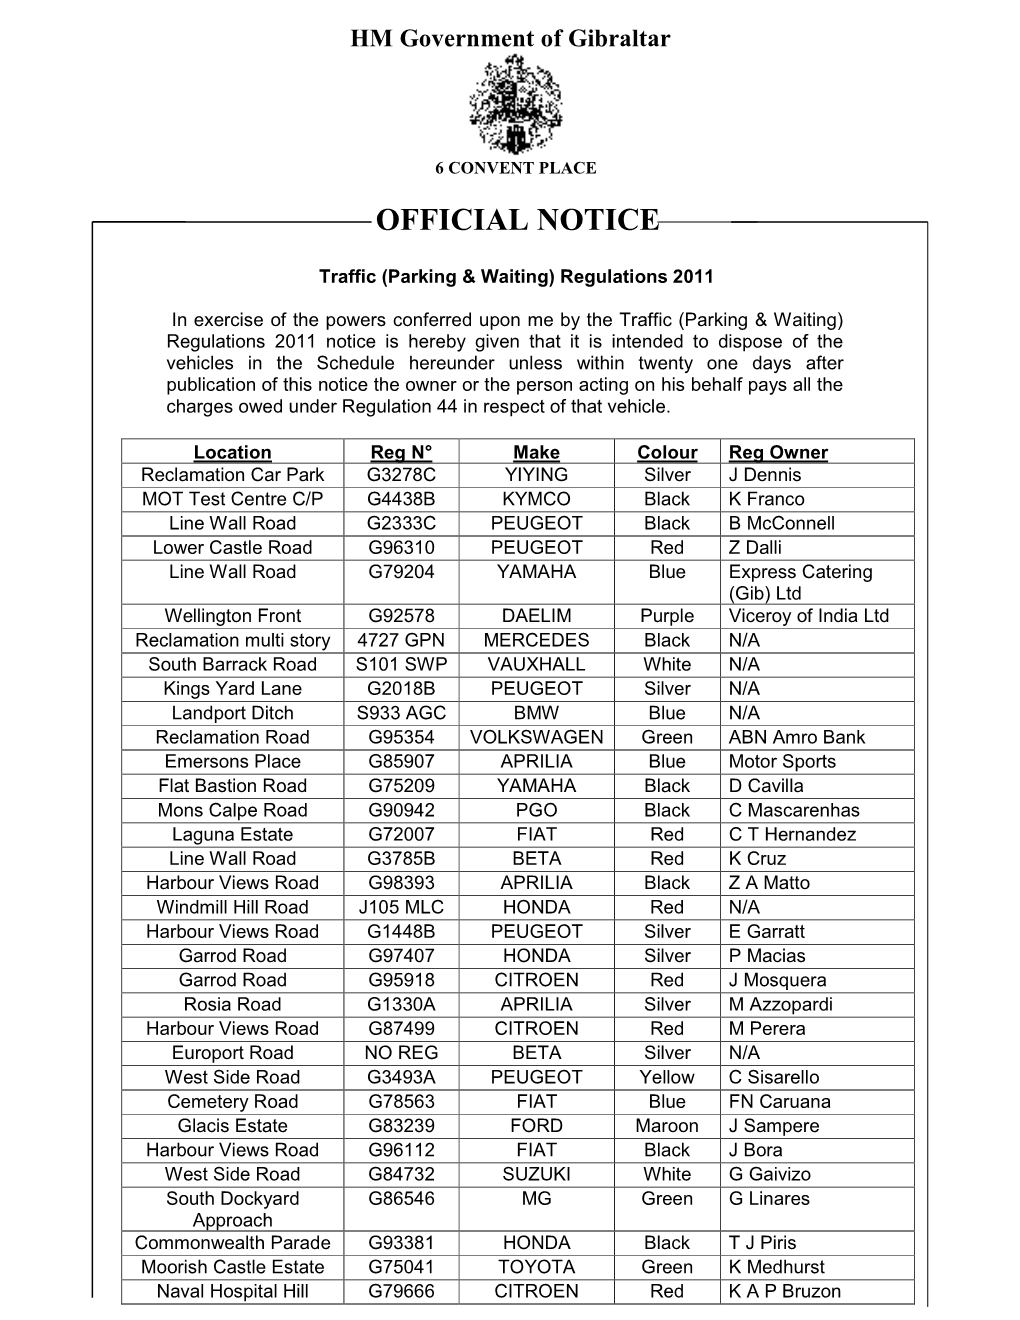 Official Notice